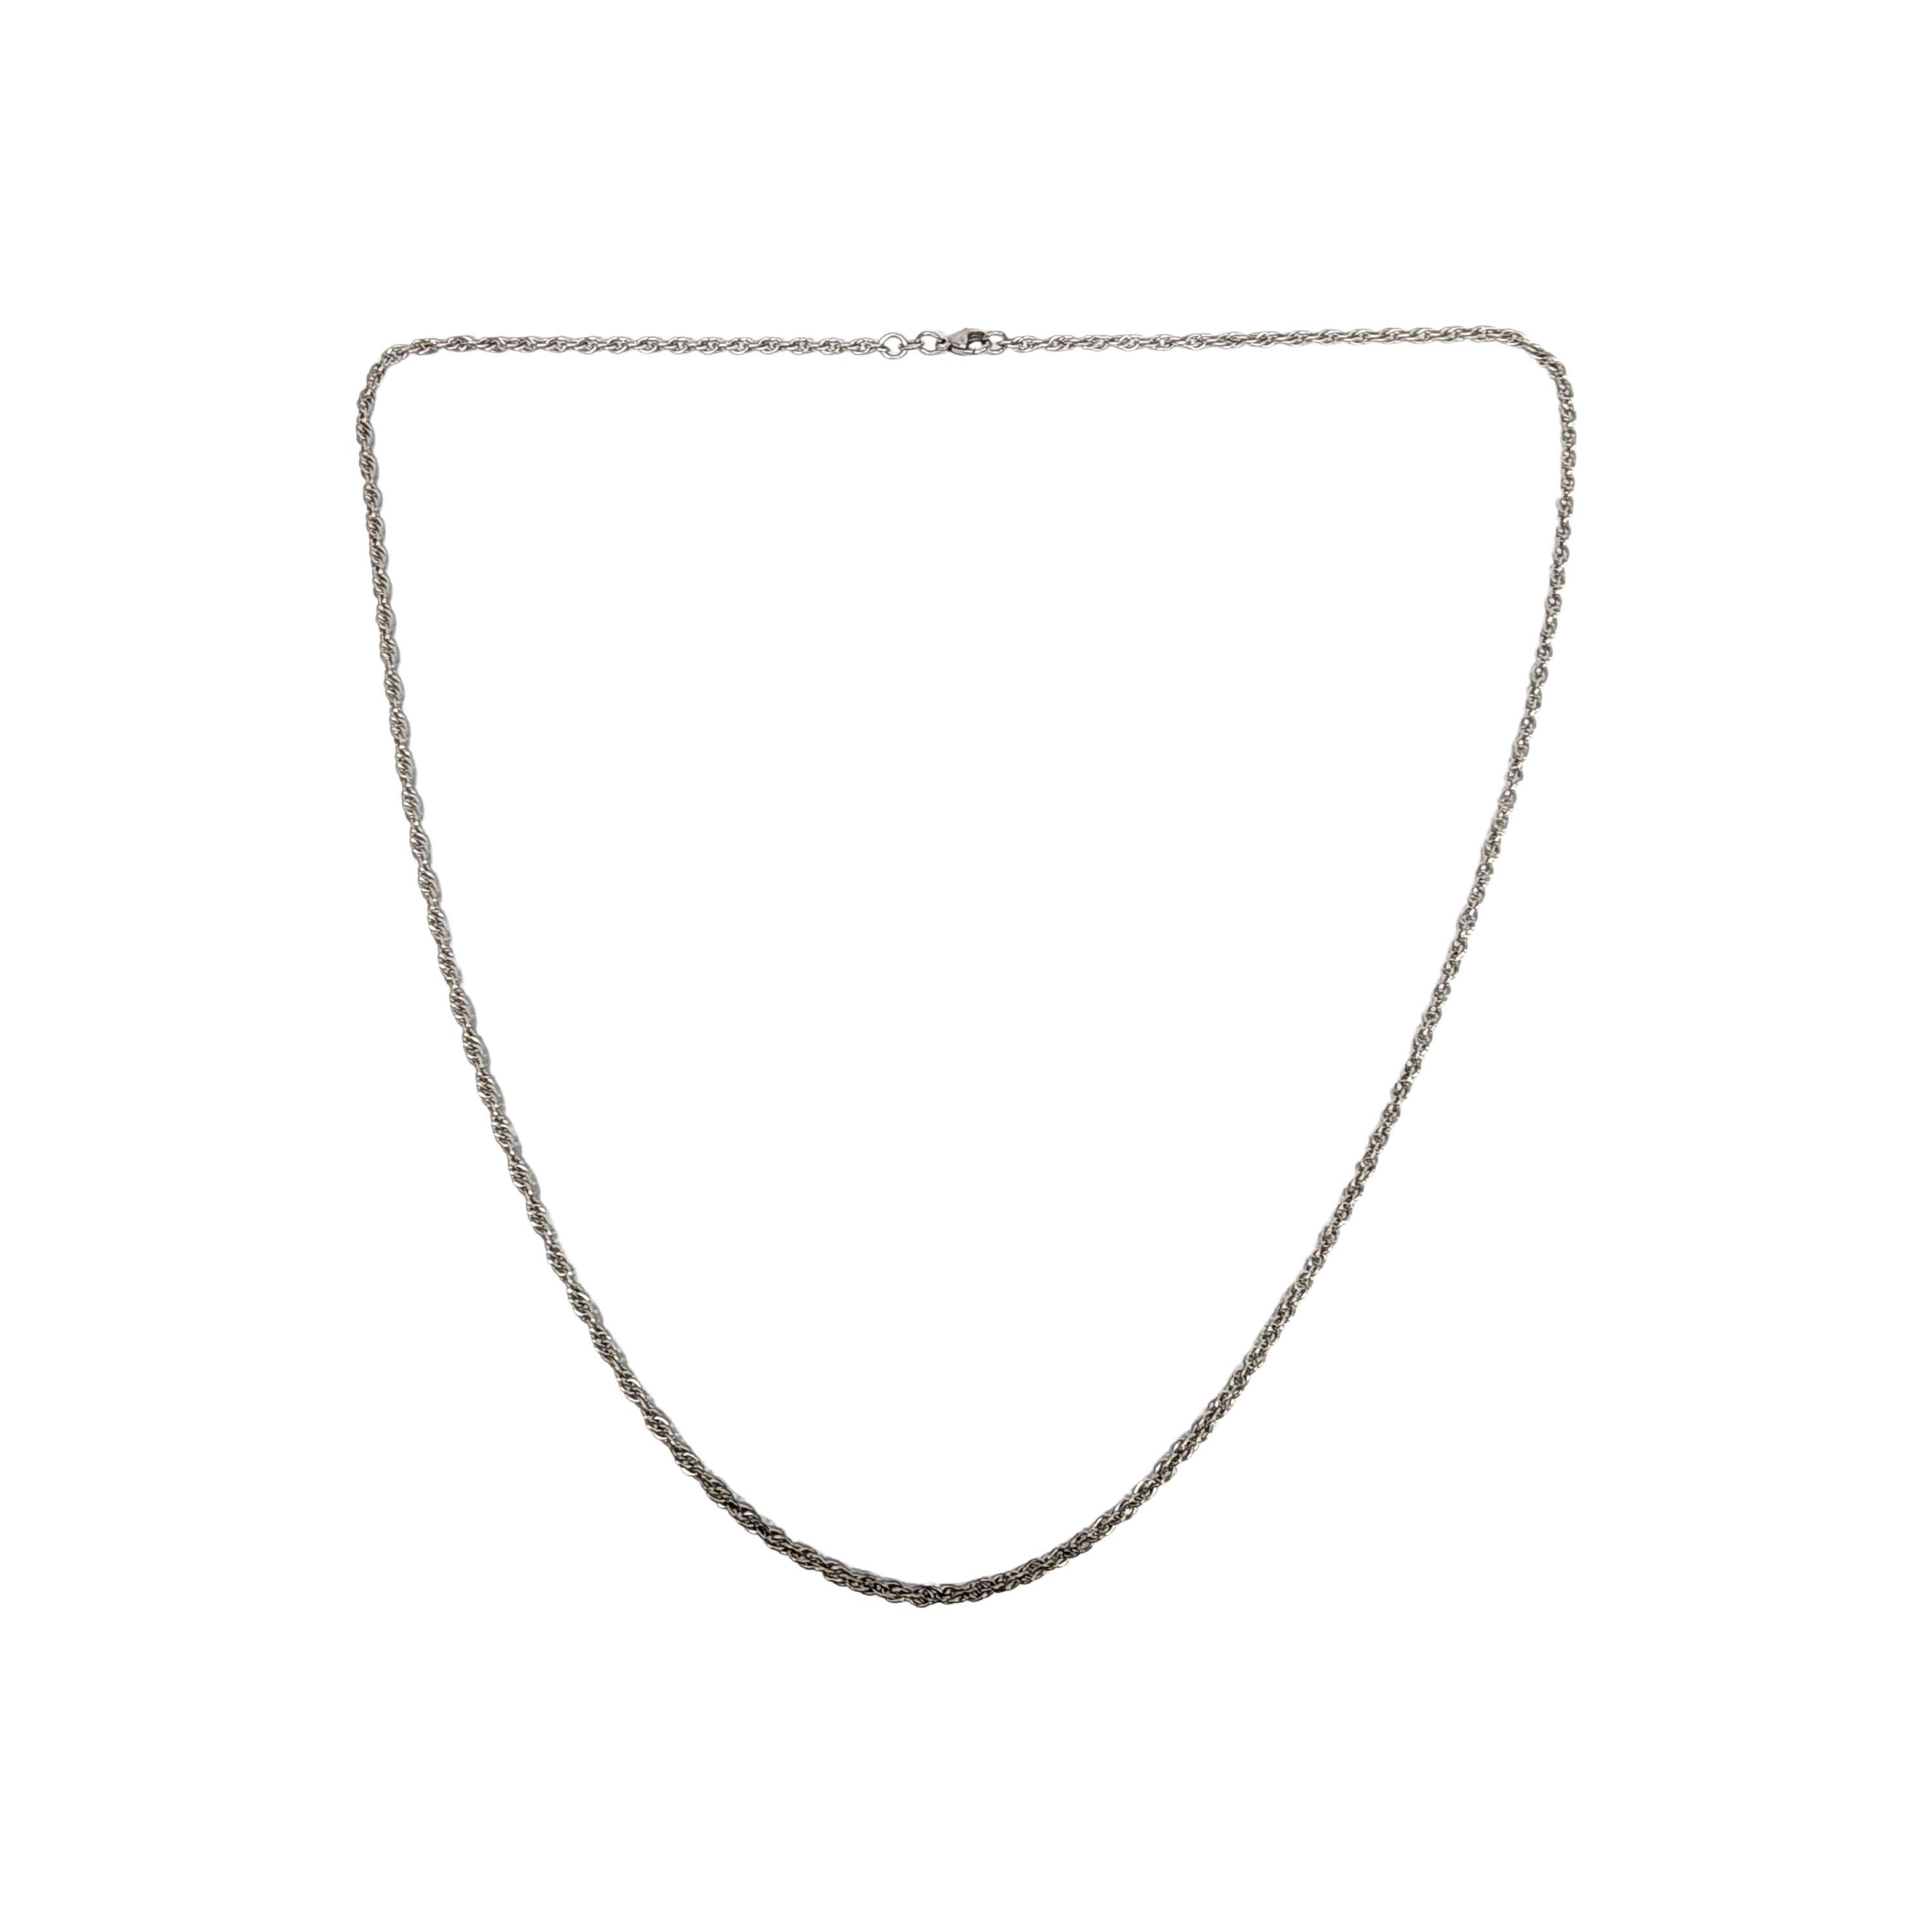 Sterling silver twist chain necklace by James Avery.

A long twist chain by iconic designer James Avery.

Weighs approx 15.7g, 10.1dwt

Measures approx 30